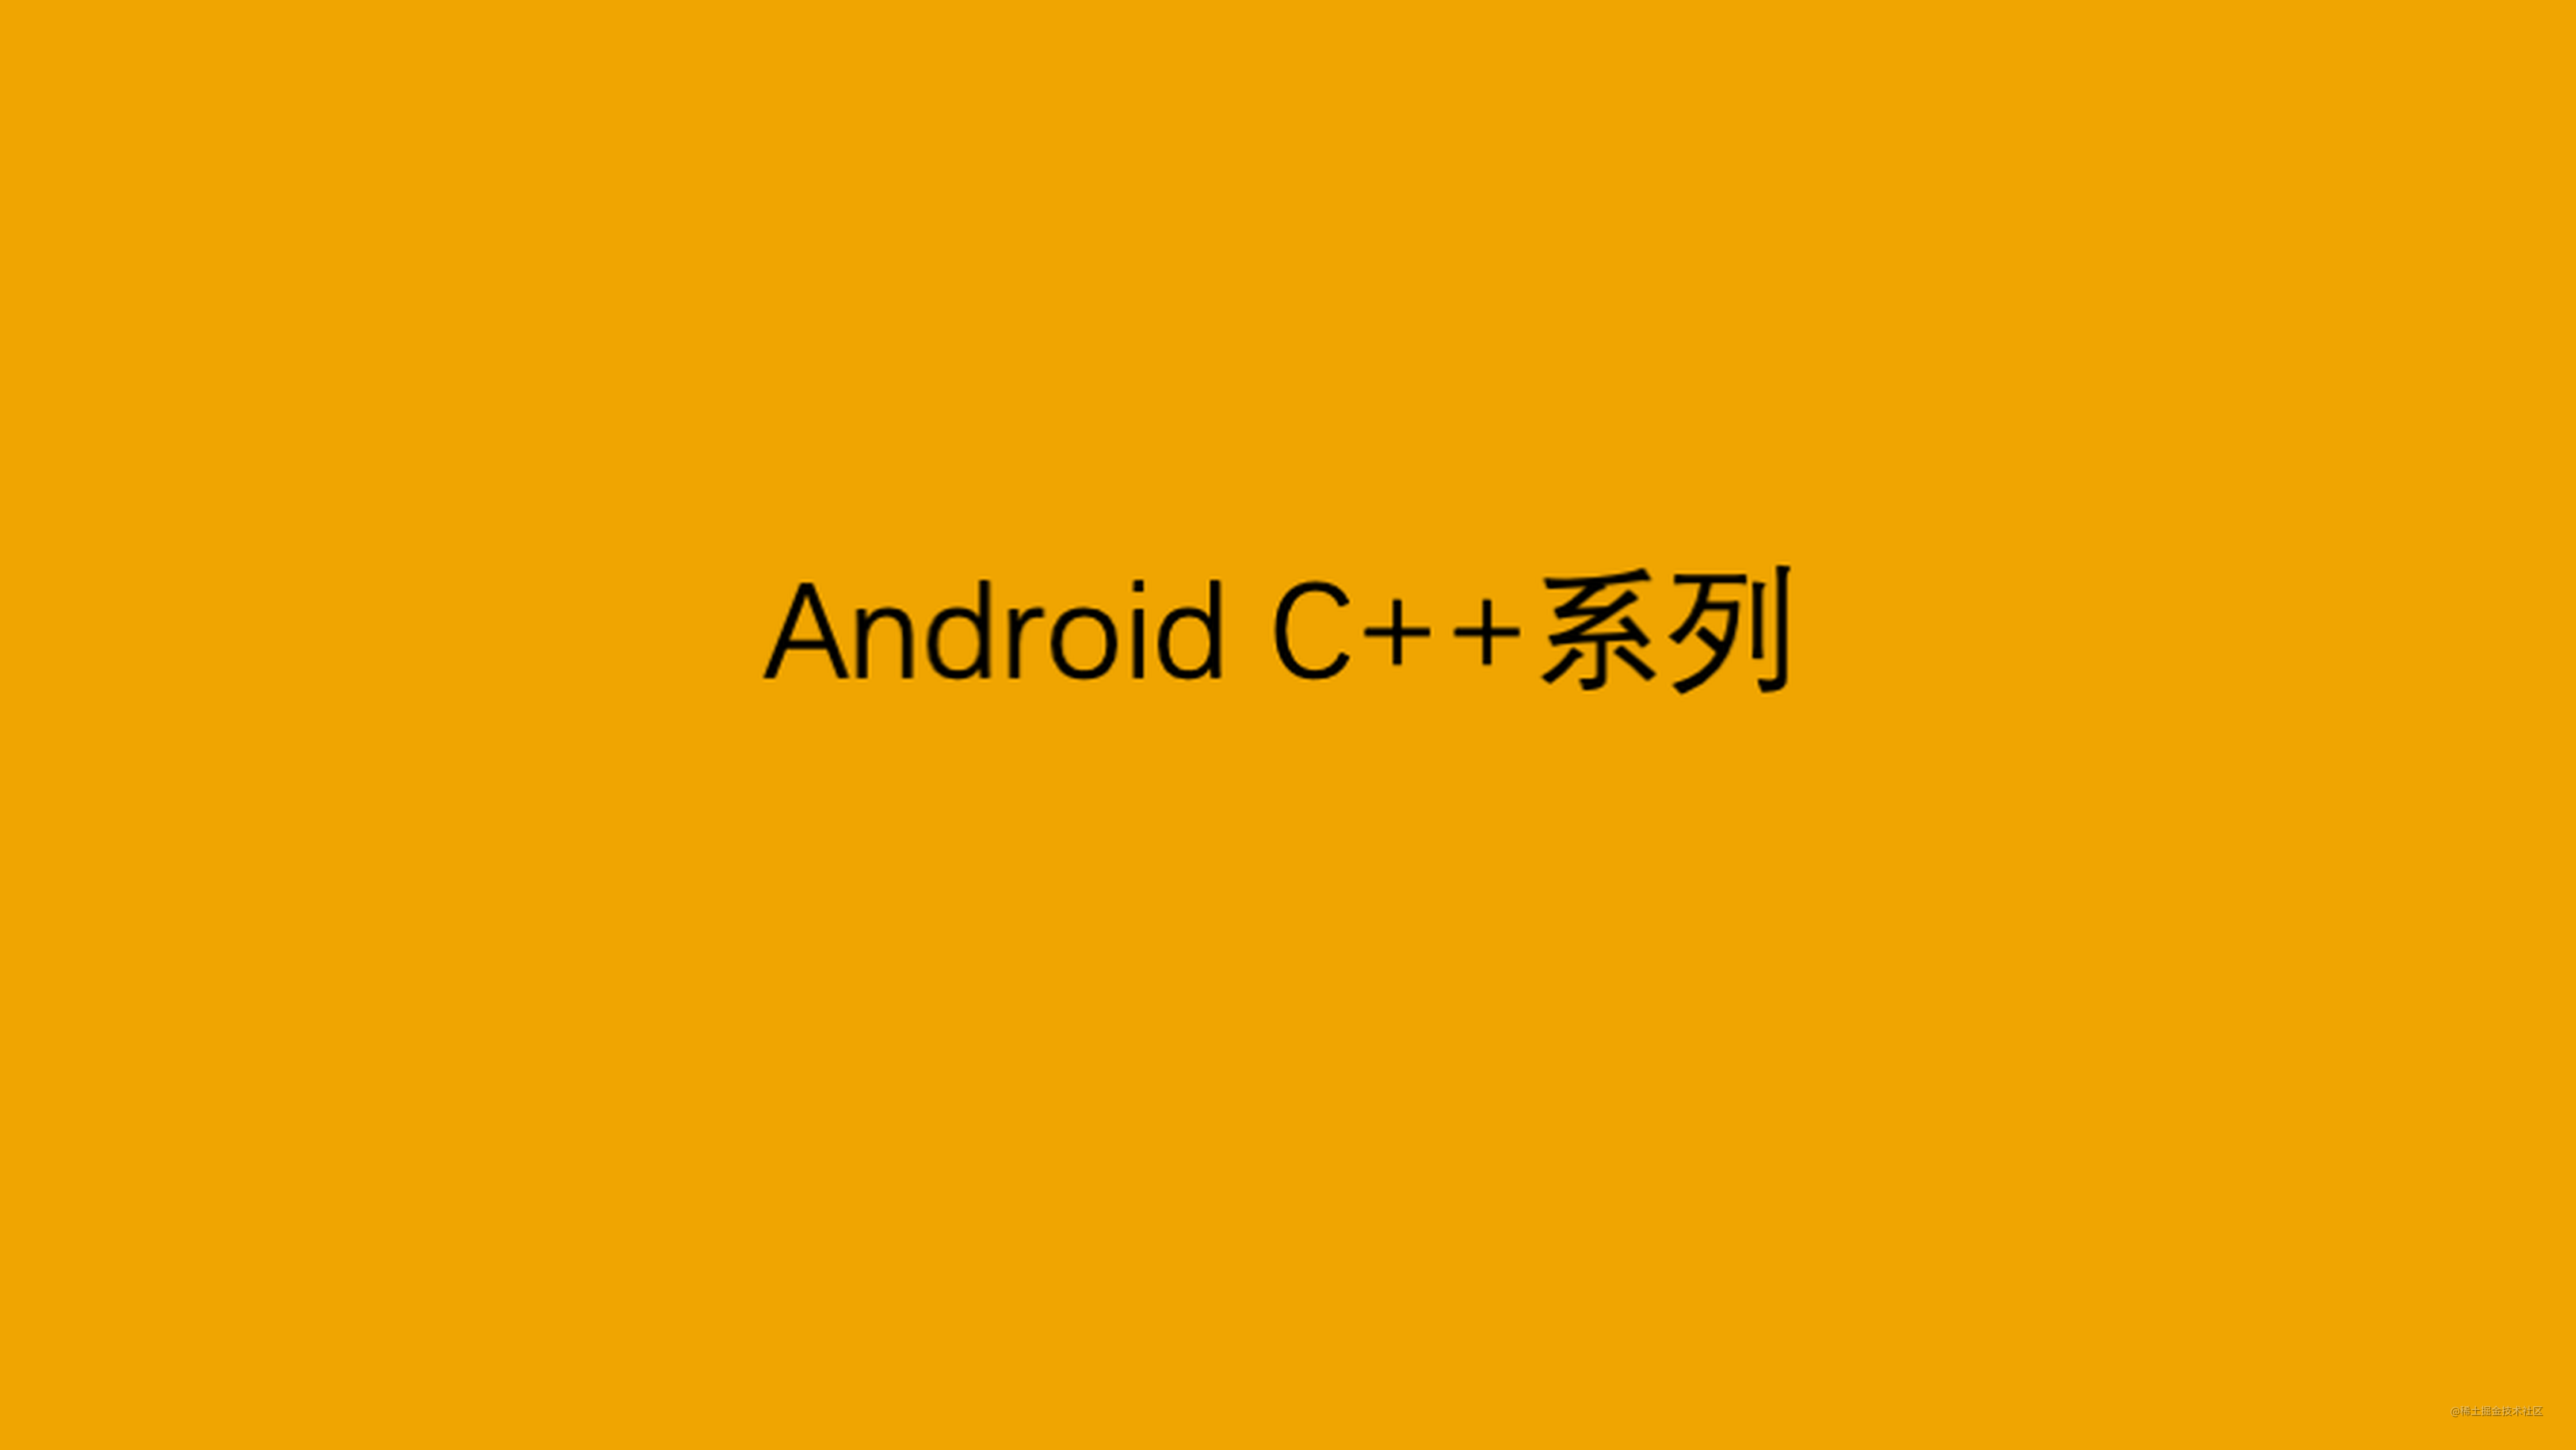 Android C++系列：NDK减少so库体积方法总结